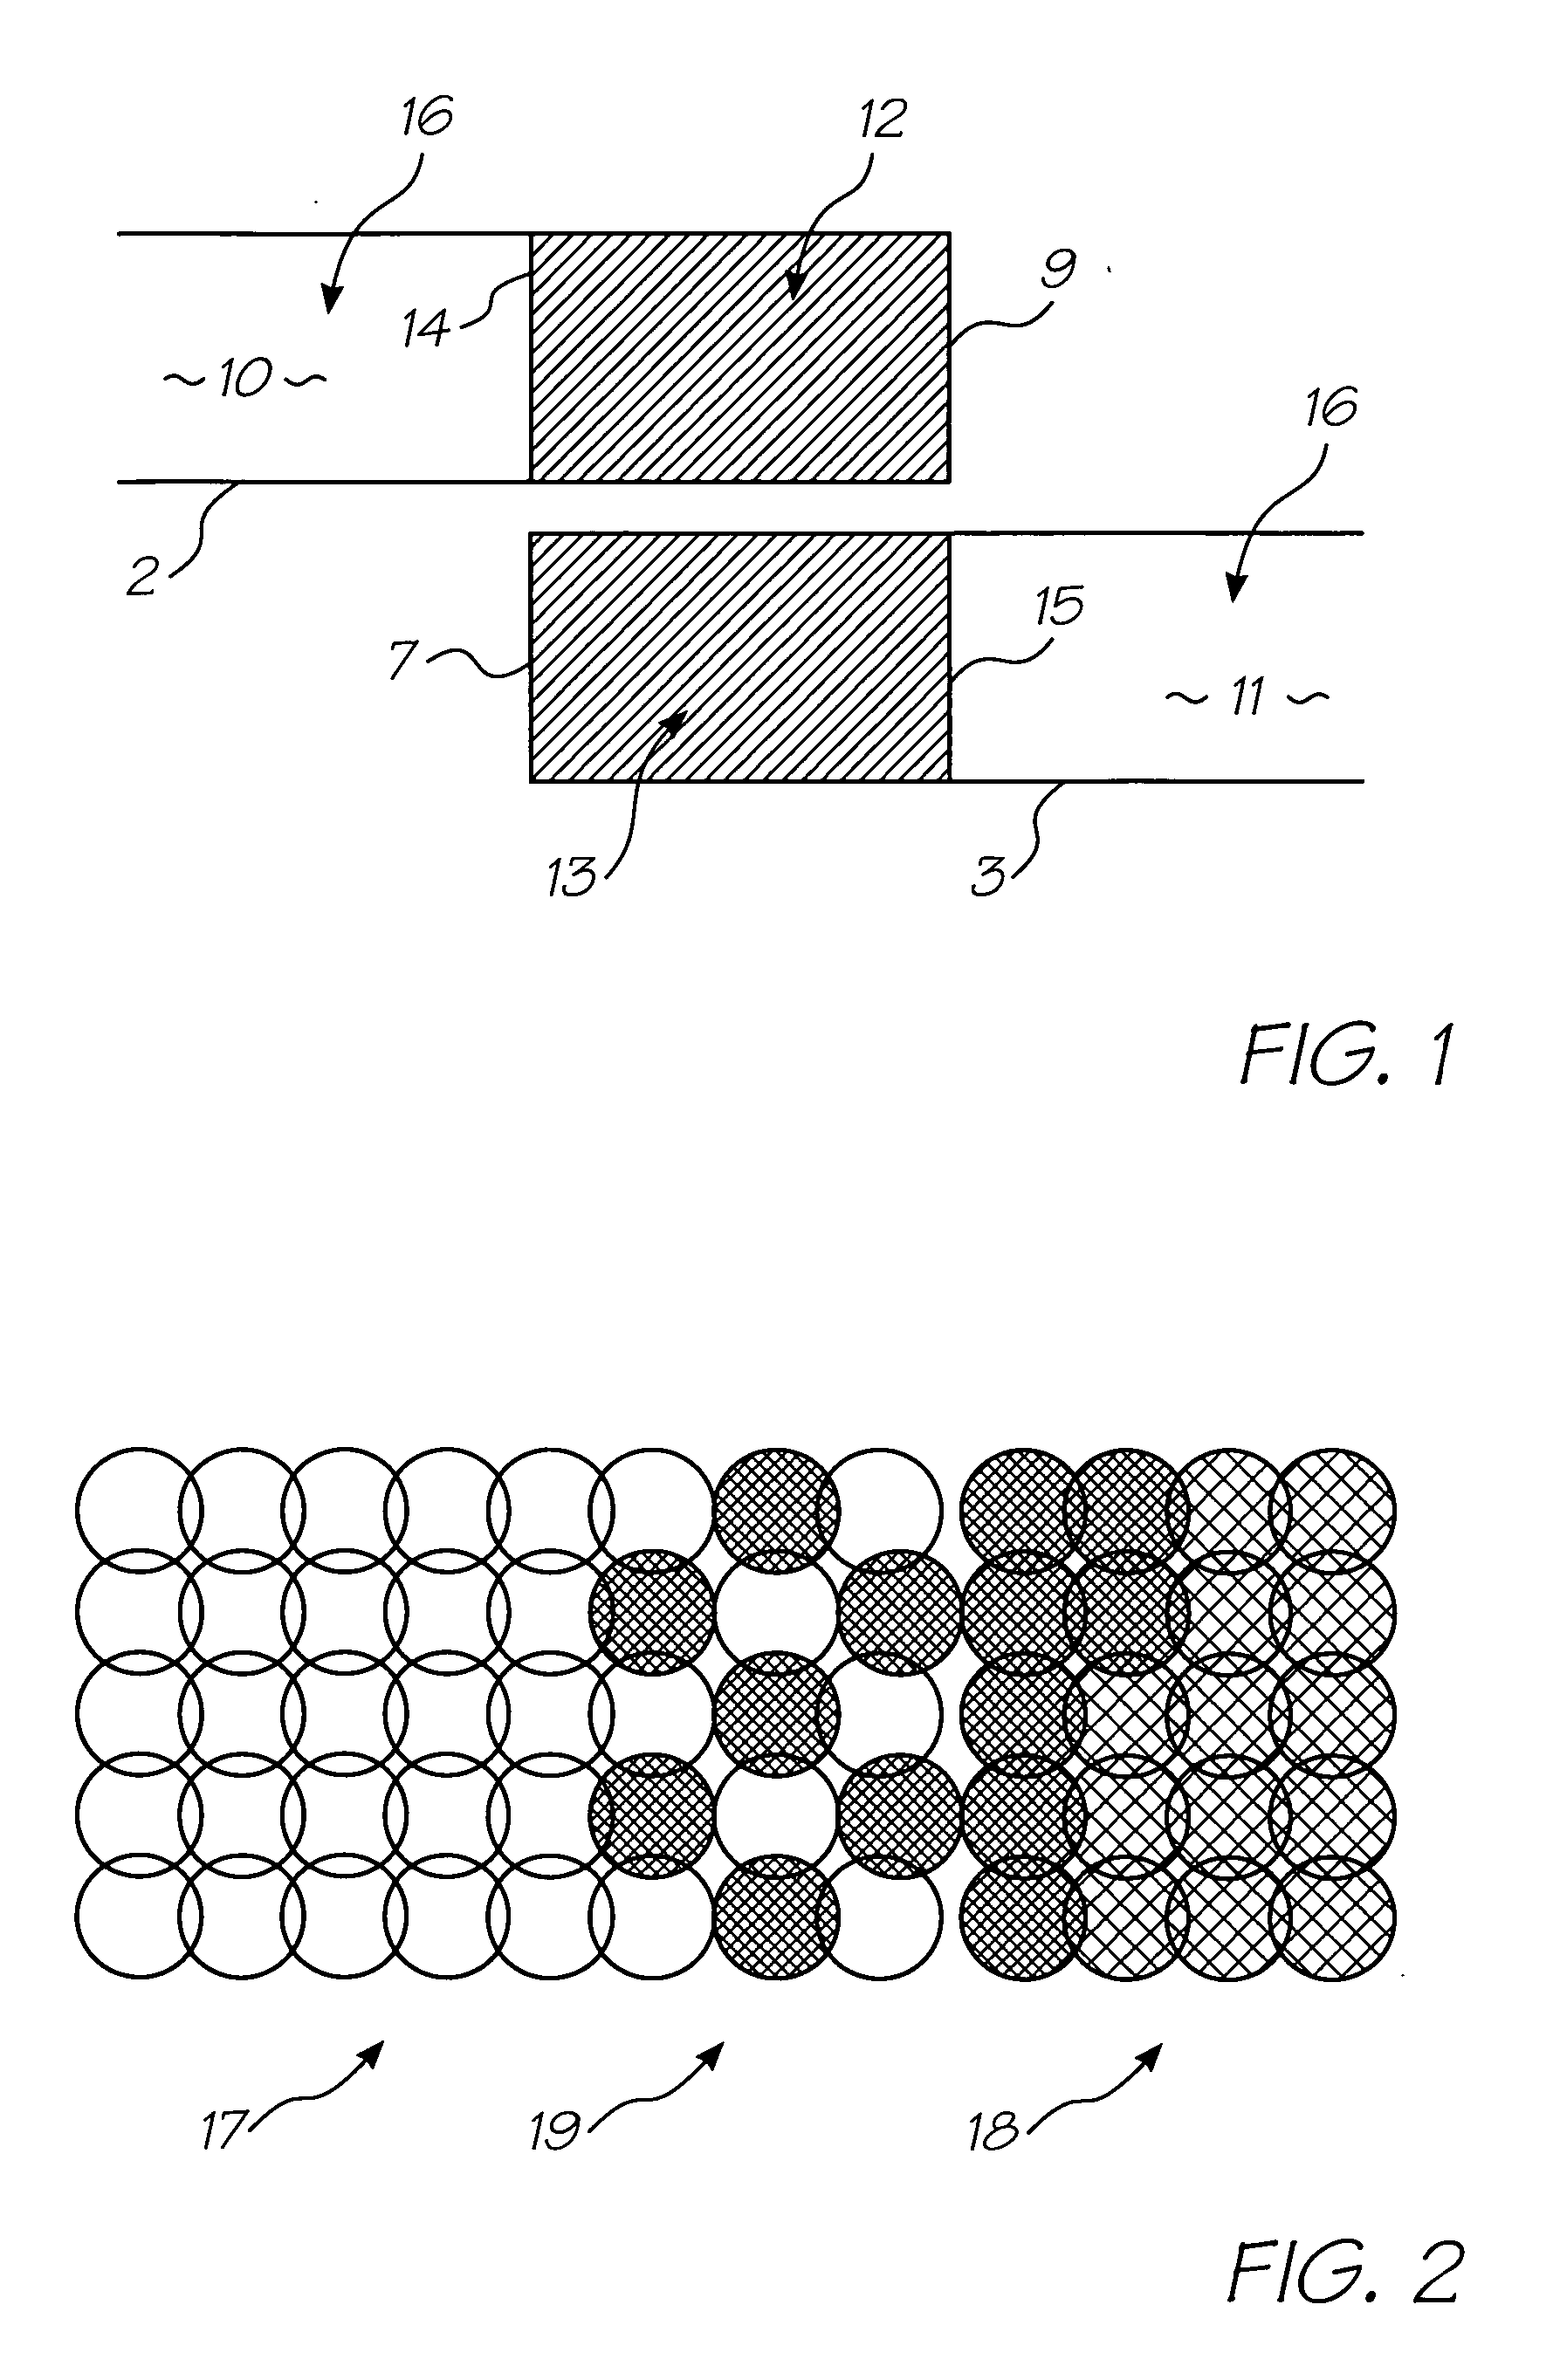 Method of generating halftone print data that accommodates overlapping printhead chips